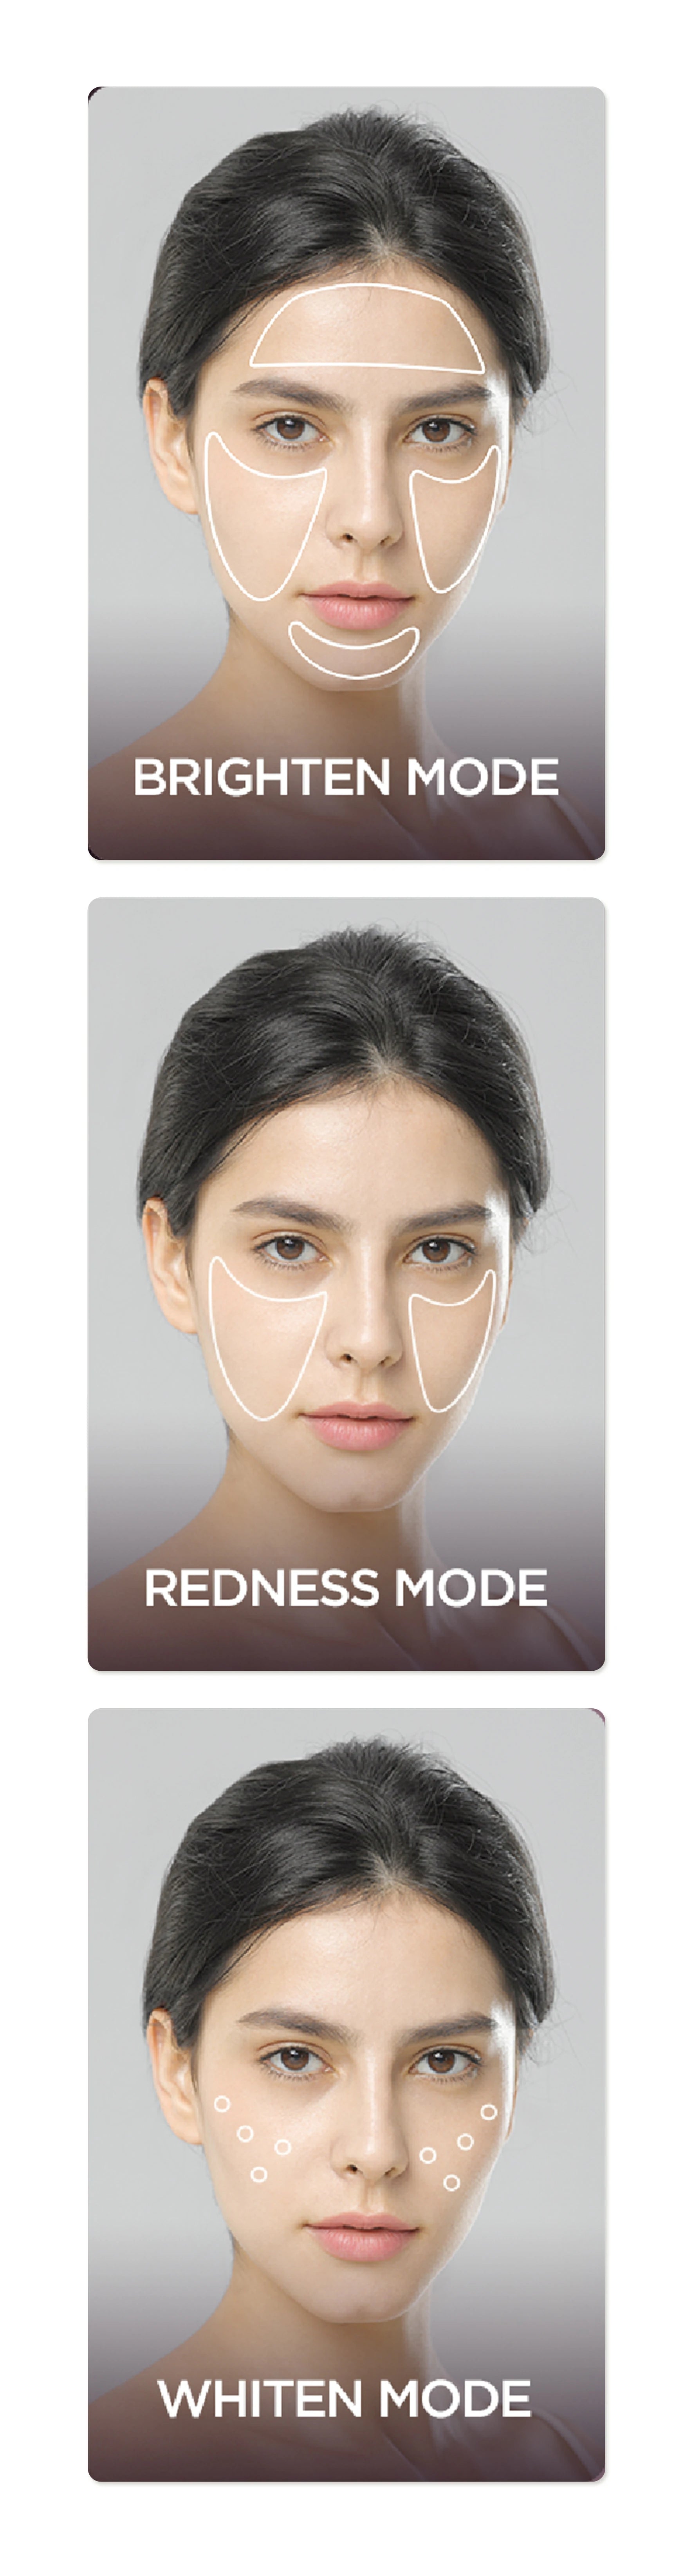 JOVS Blacken DPL Photofacial skincare displays Brighten, Redness, and Whiten modes for a comprehensive skin treatment approach, enhancing facial features.